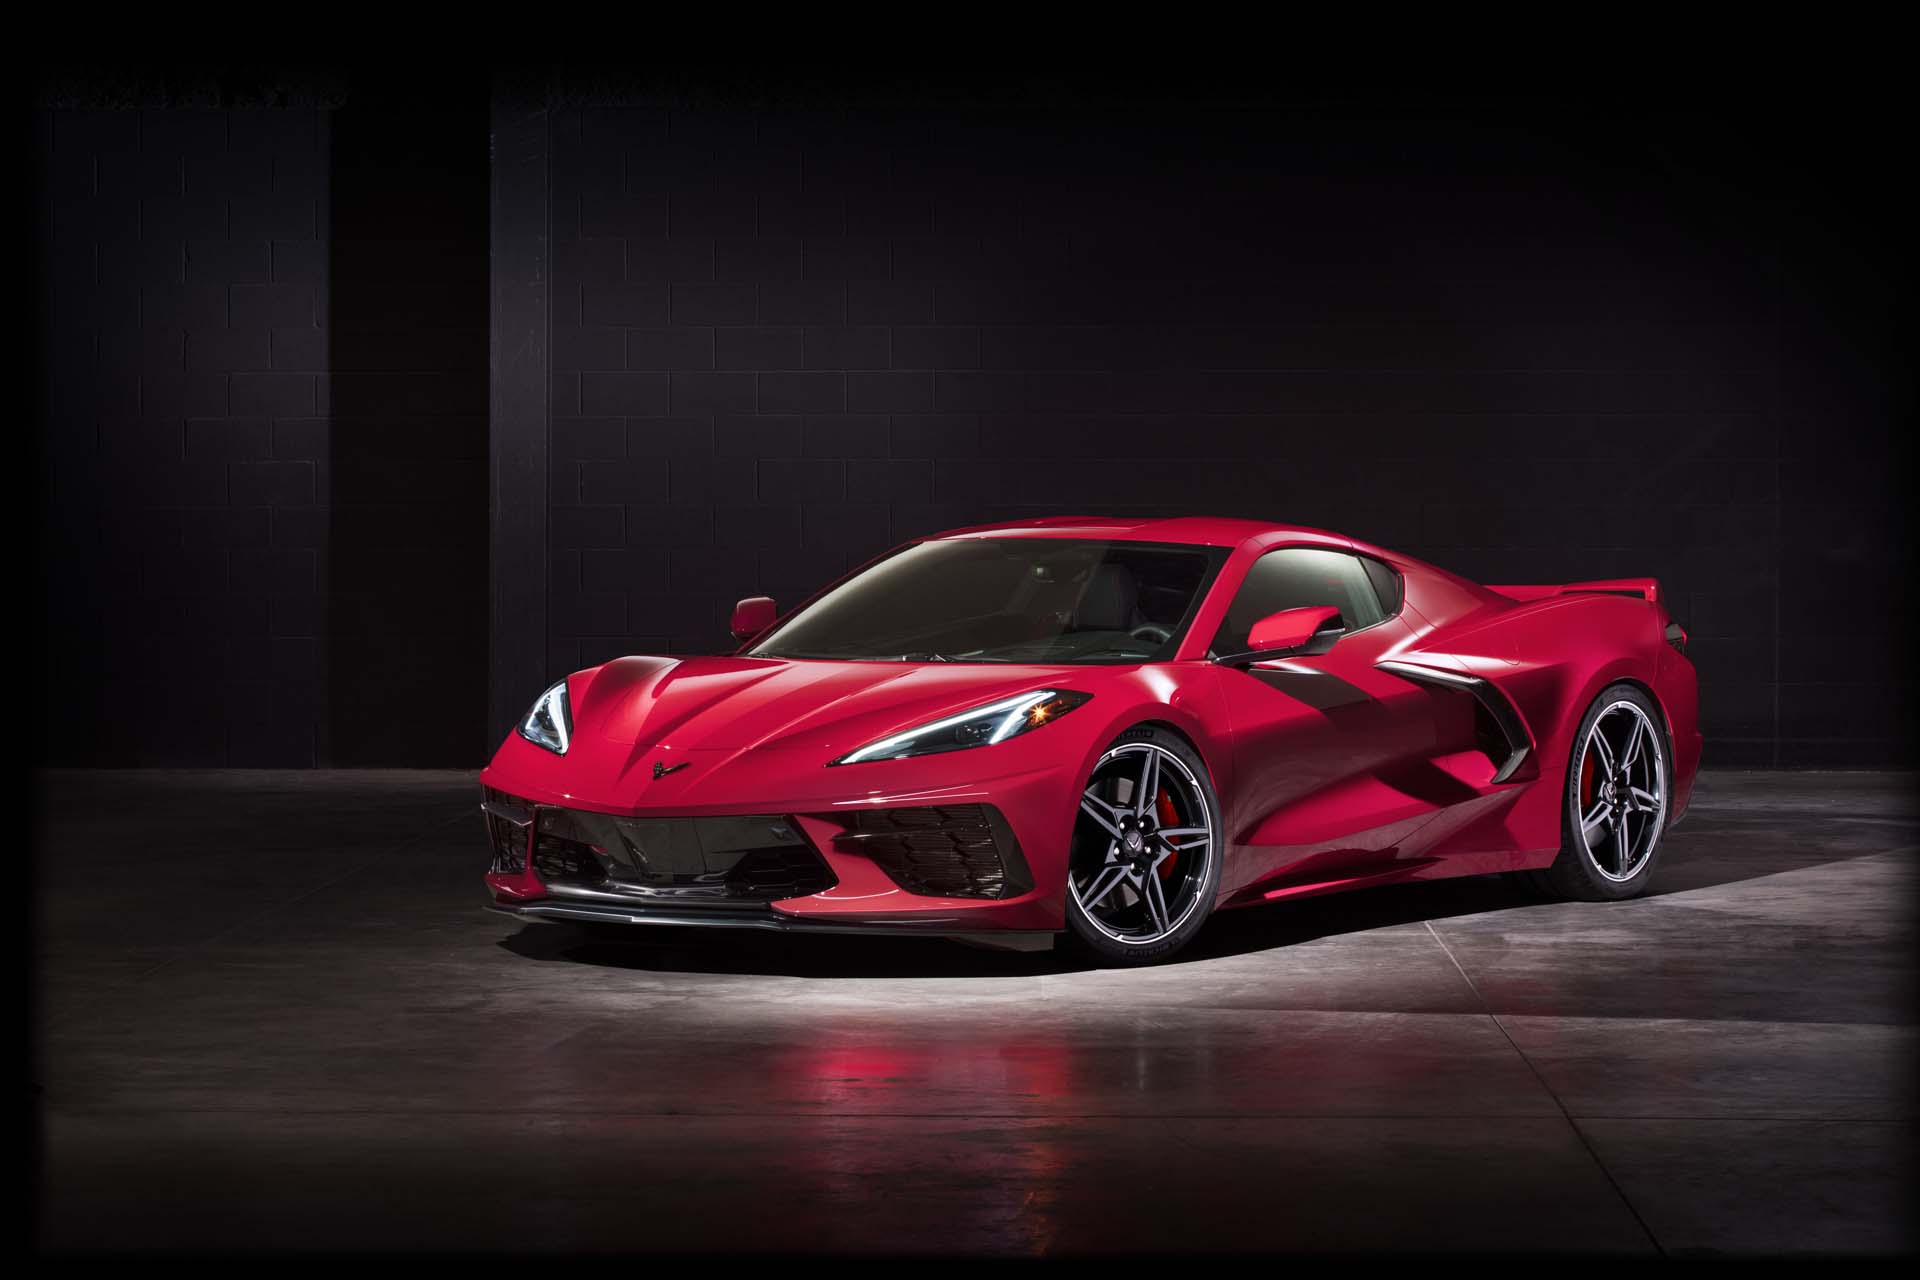 The price of the all-new 2020 Corvette officially revealed. How much is it?